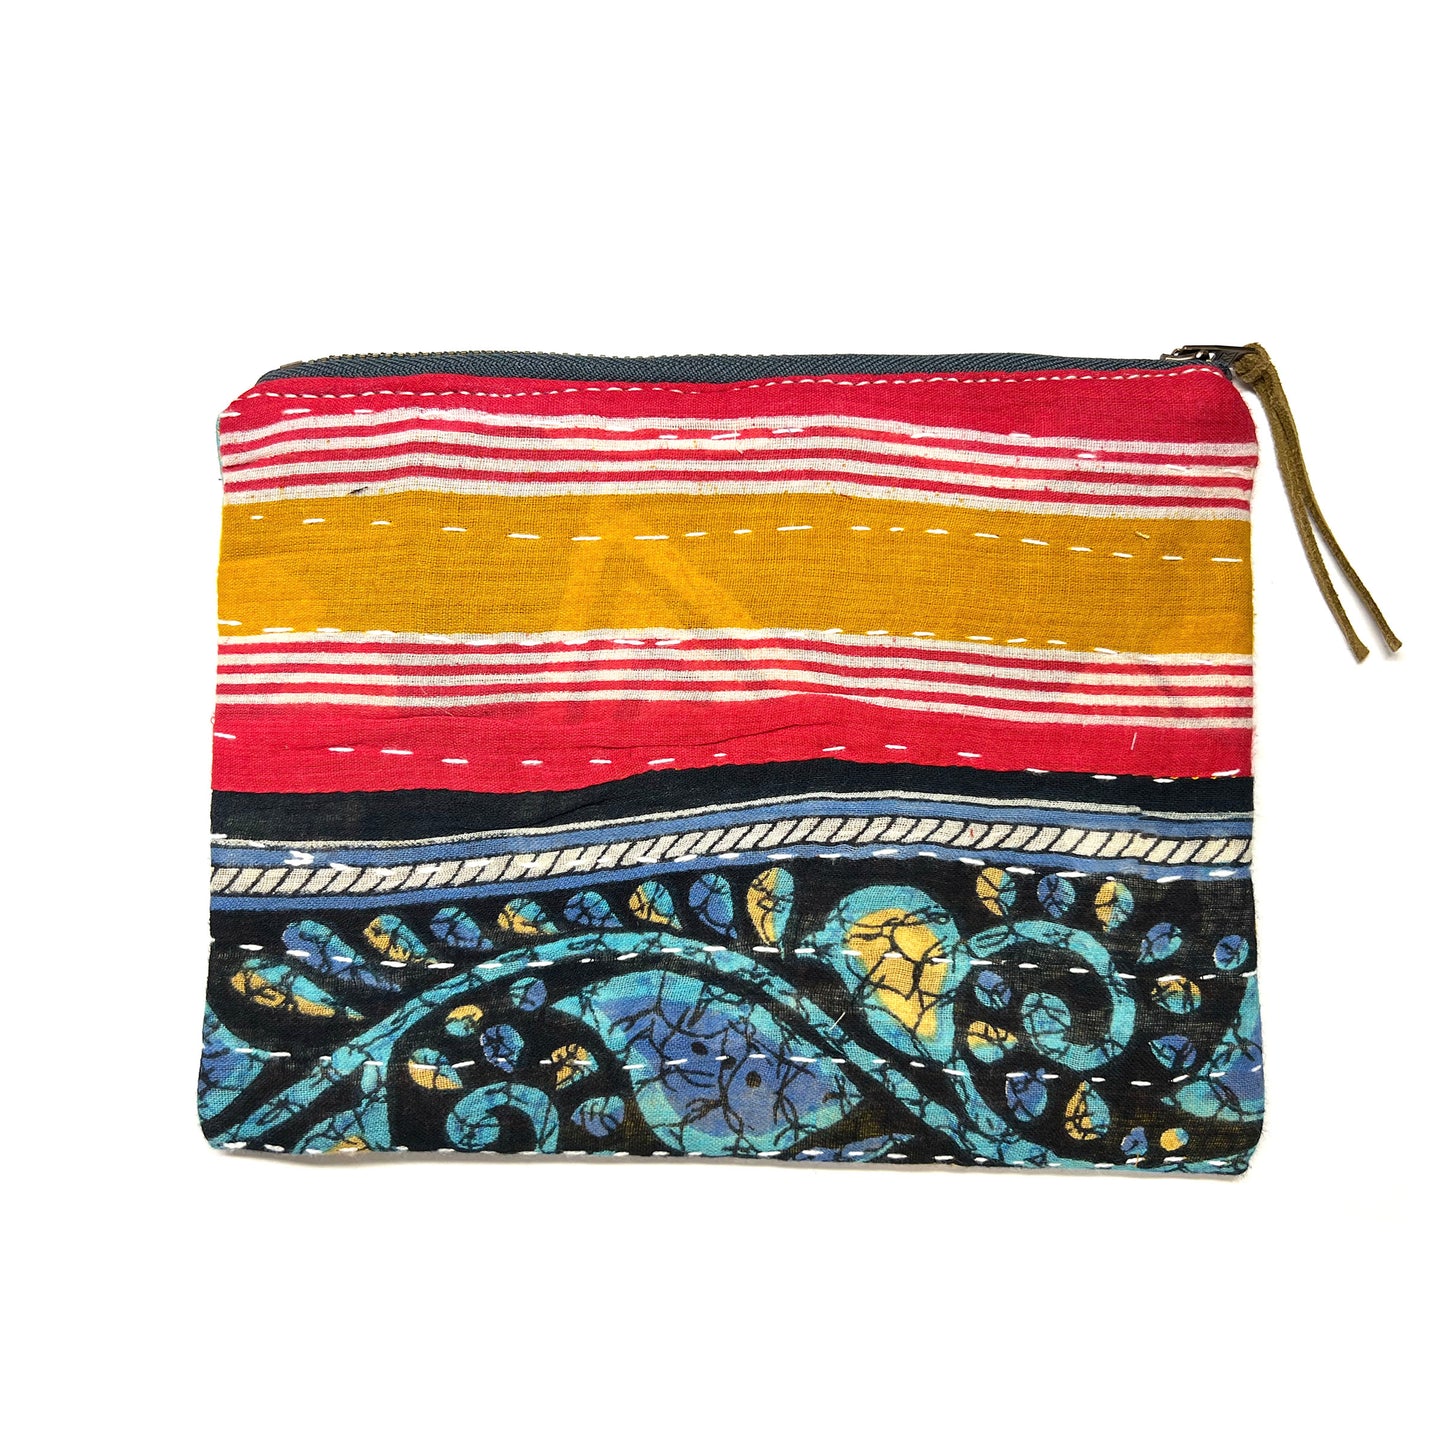 ONE OF A KIND POUCH 0003